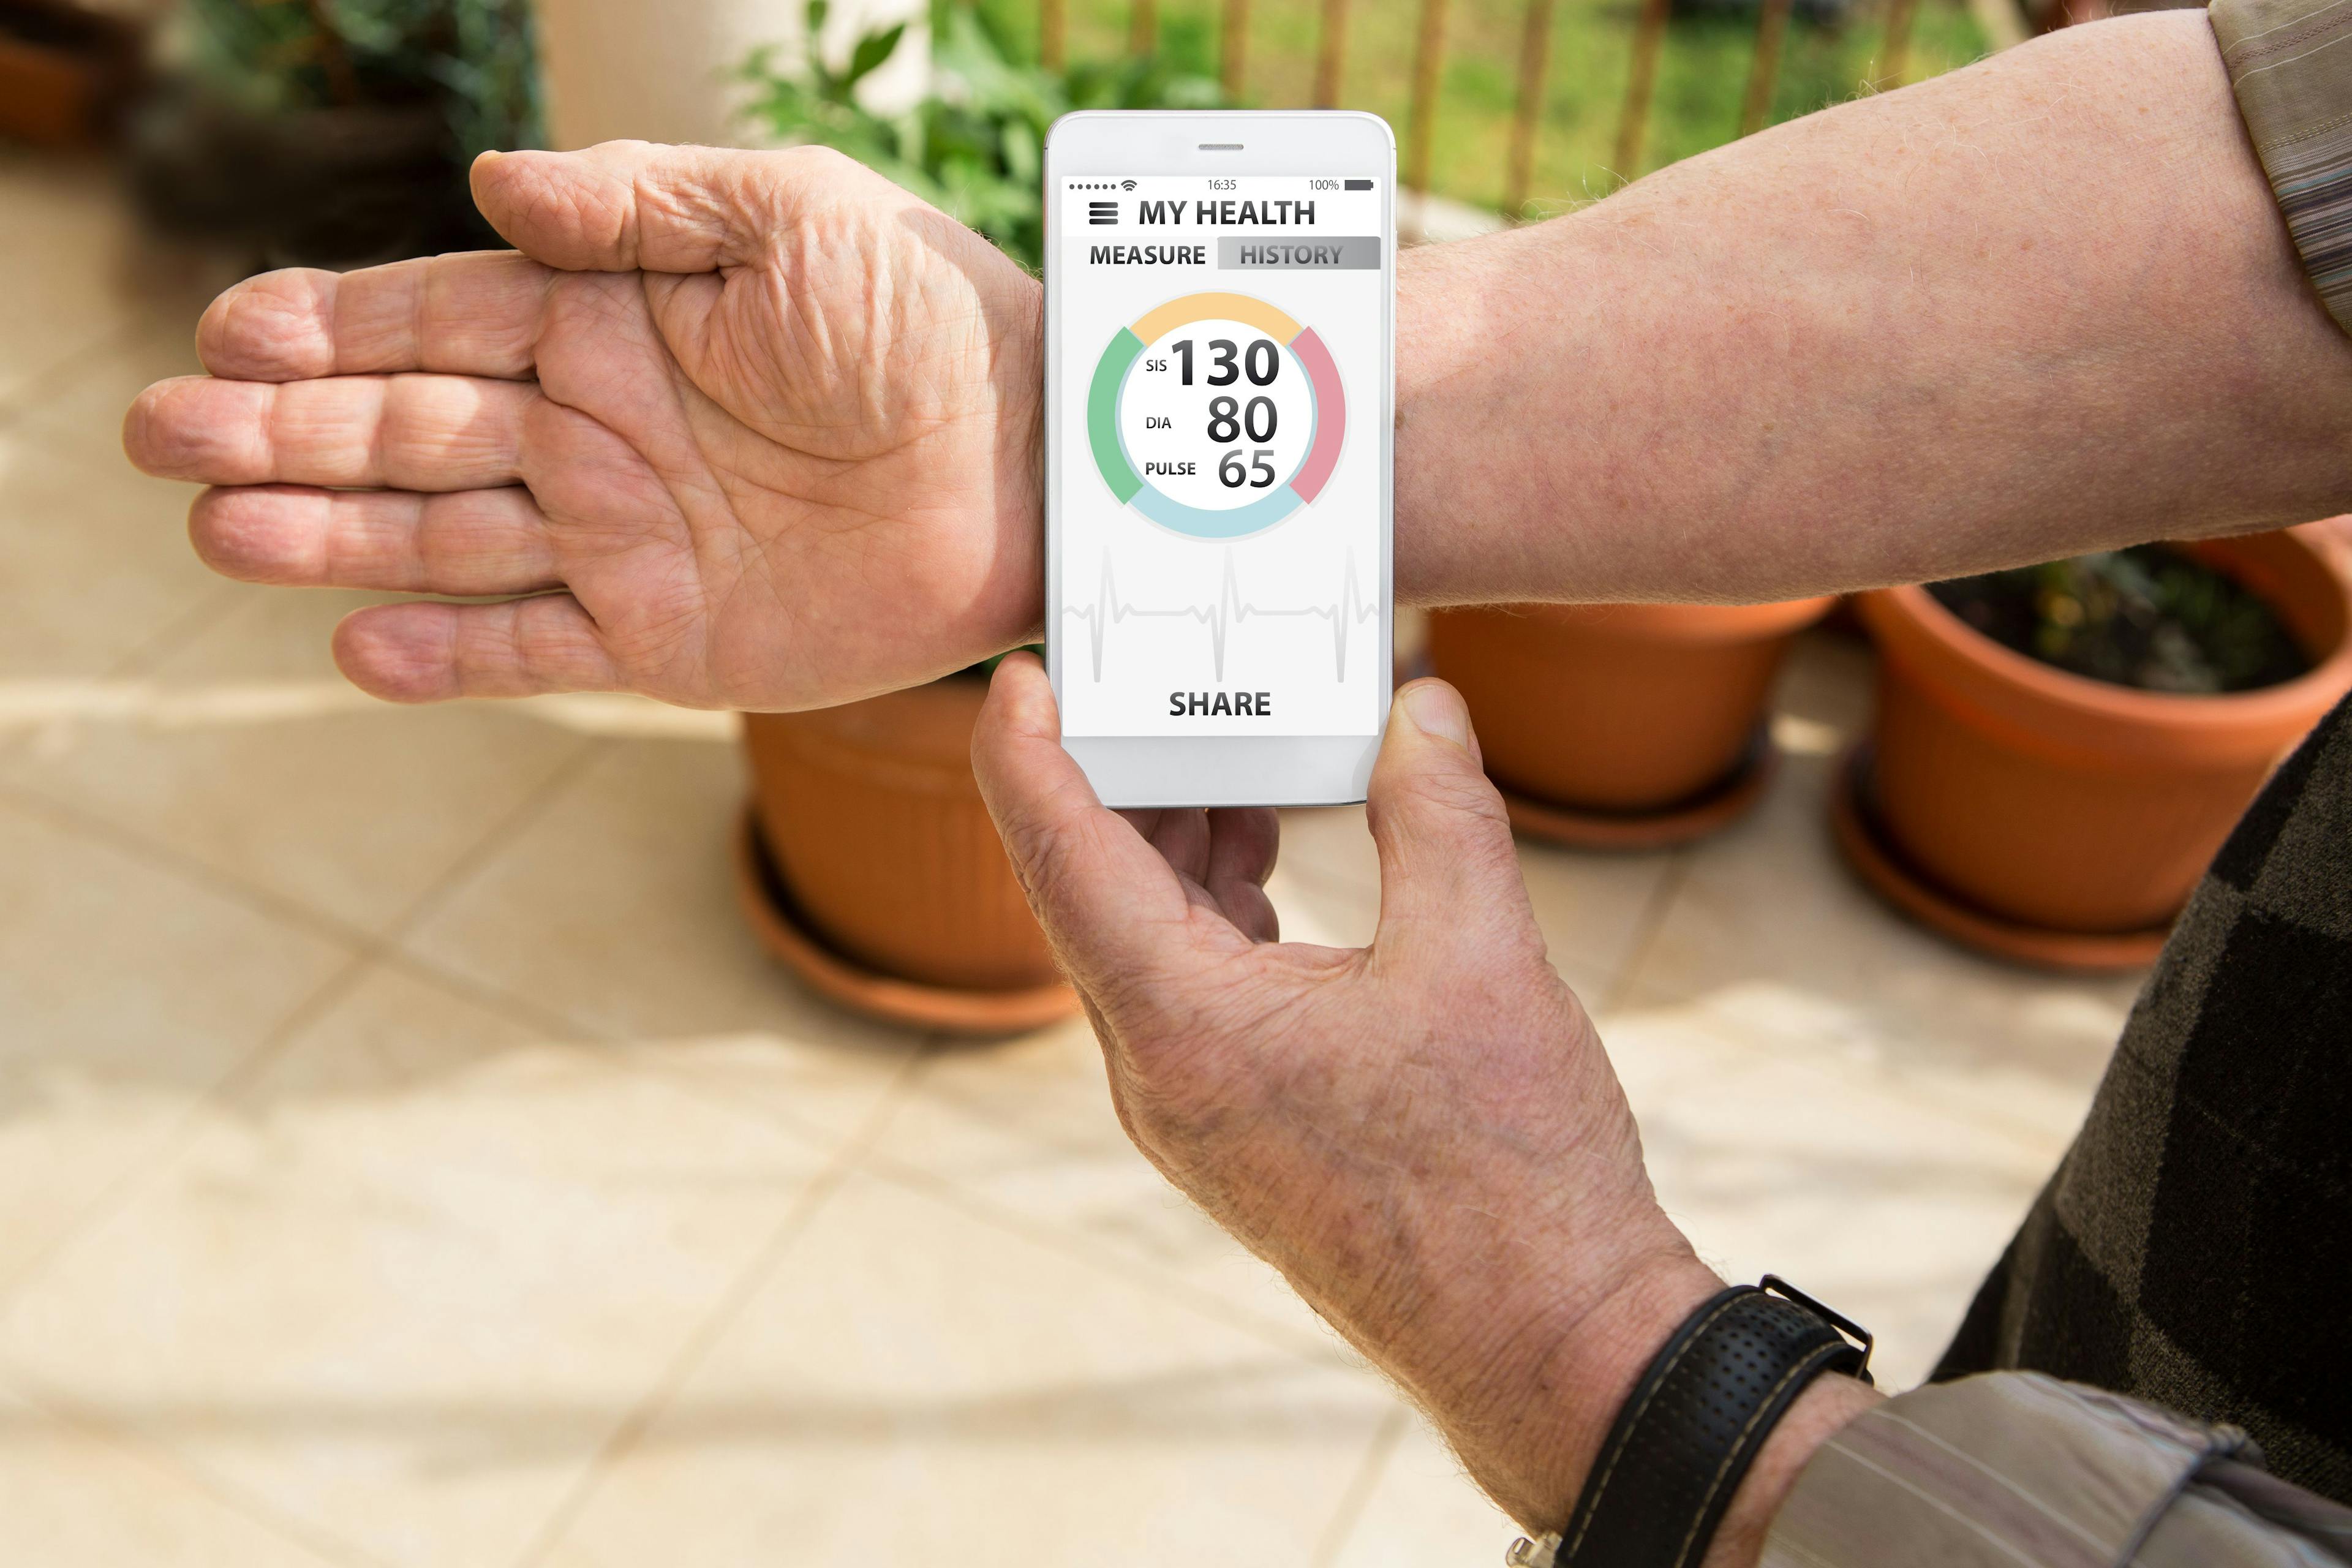 Mobile App Helps Patients Achieve Sustained BP Reduction, Particularly in Stage 2 Hypertension